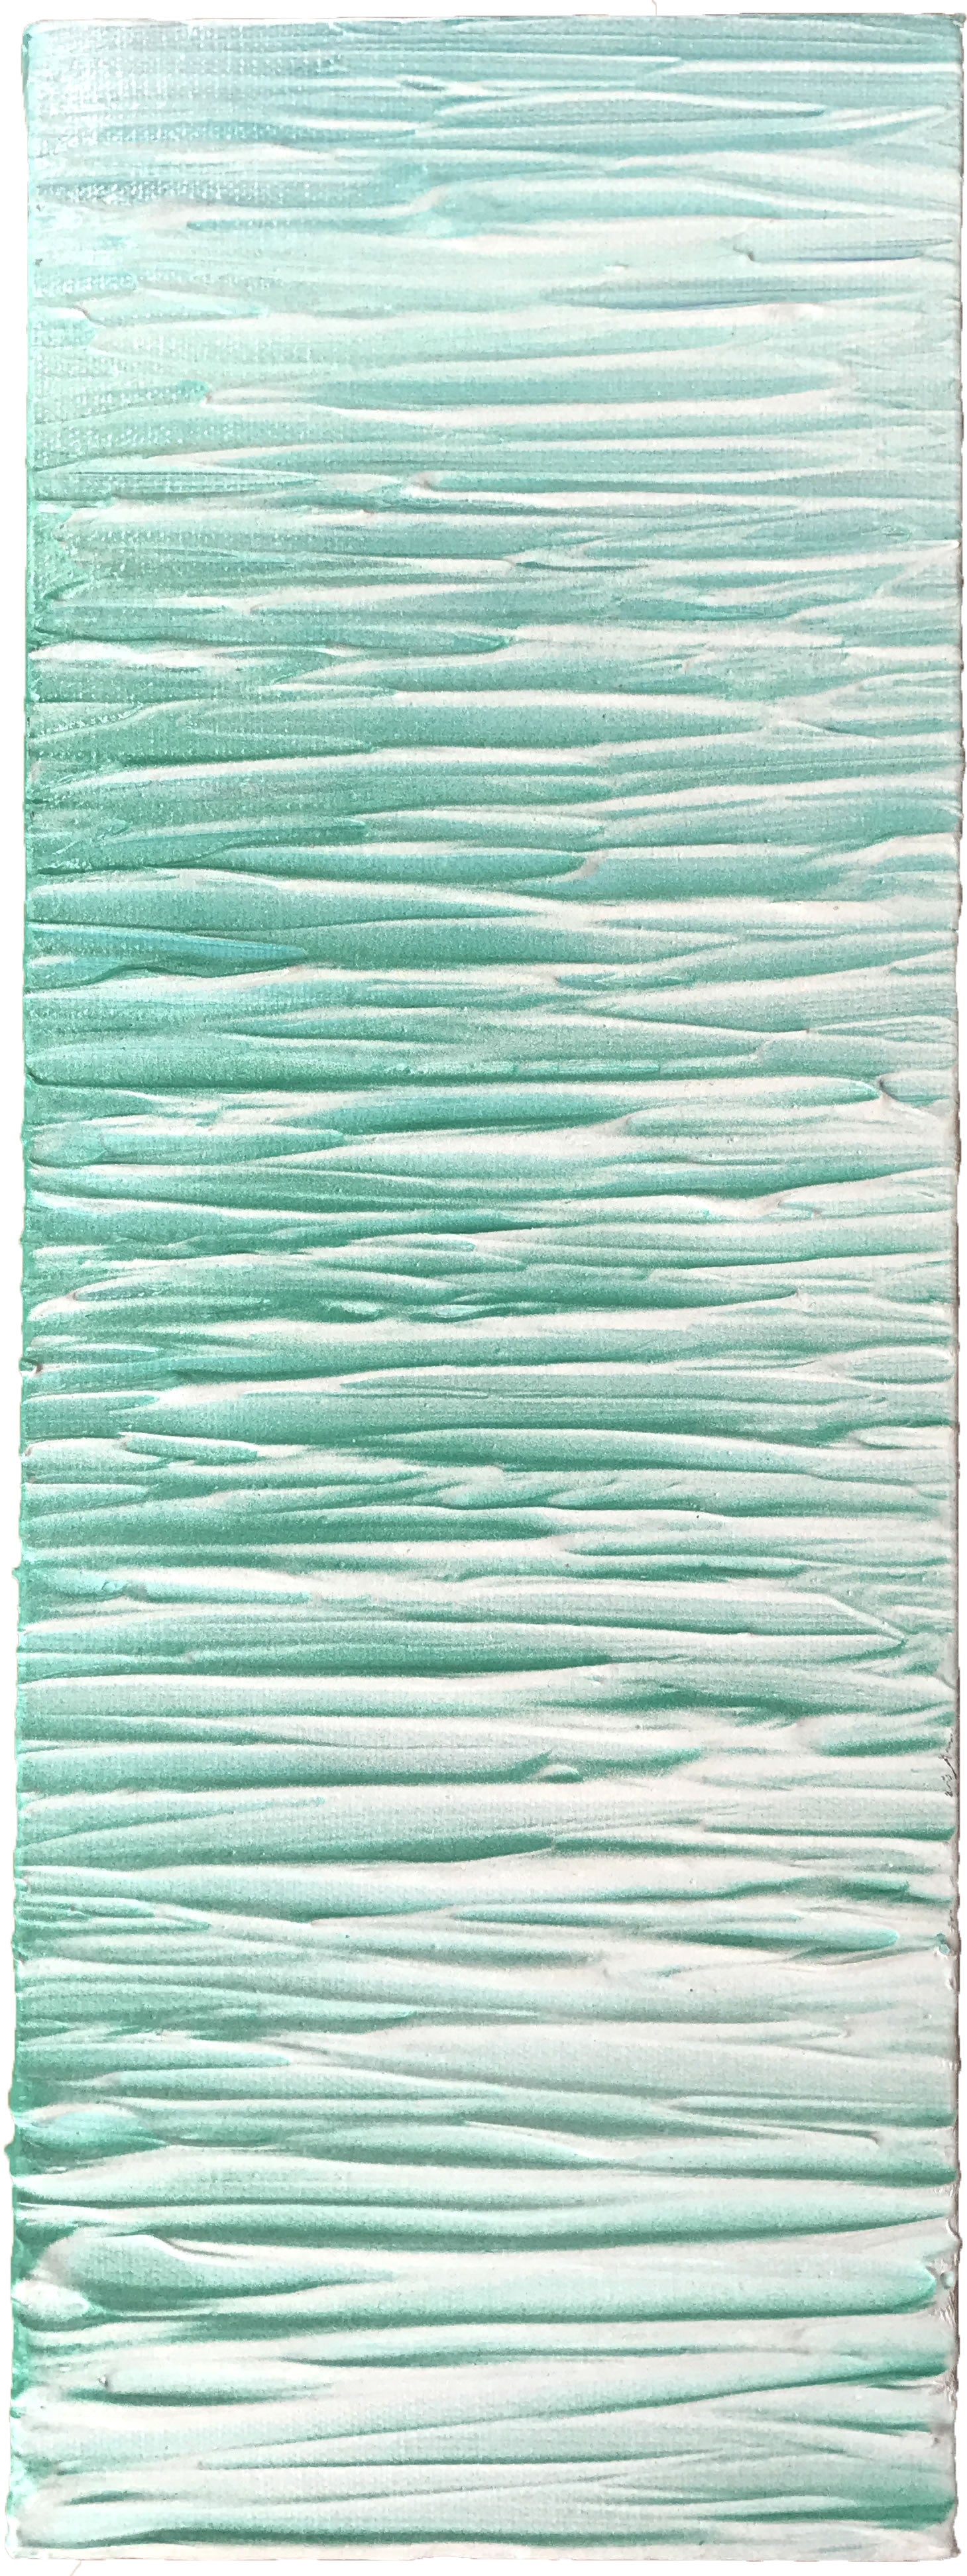 Tropical Ripples - Abstract Sea Painting